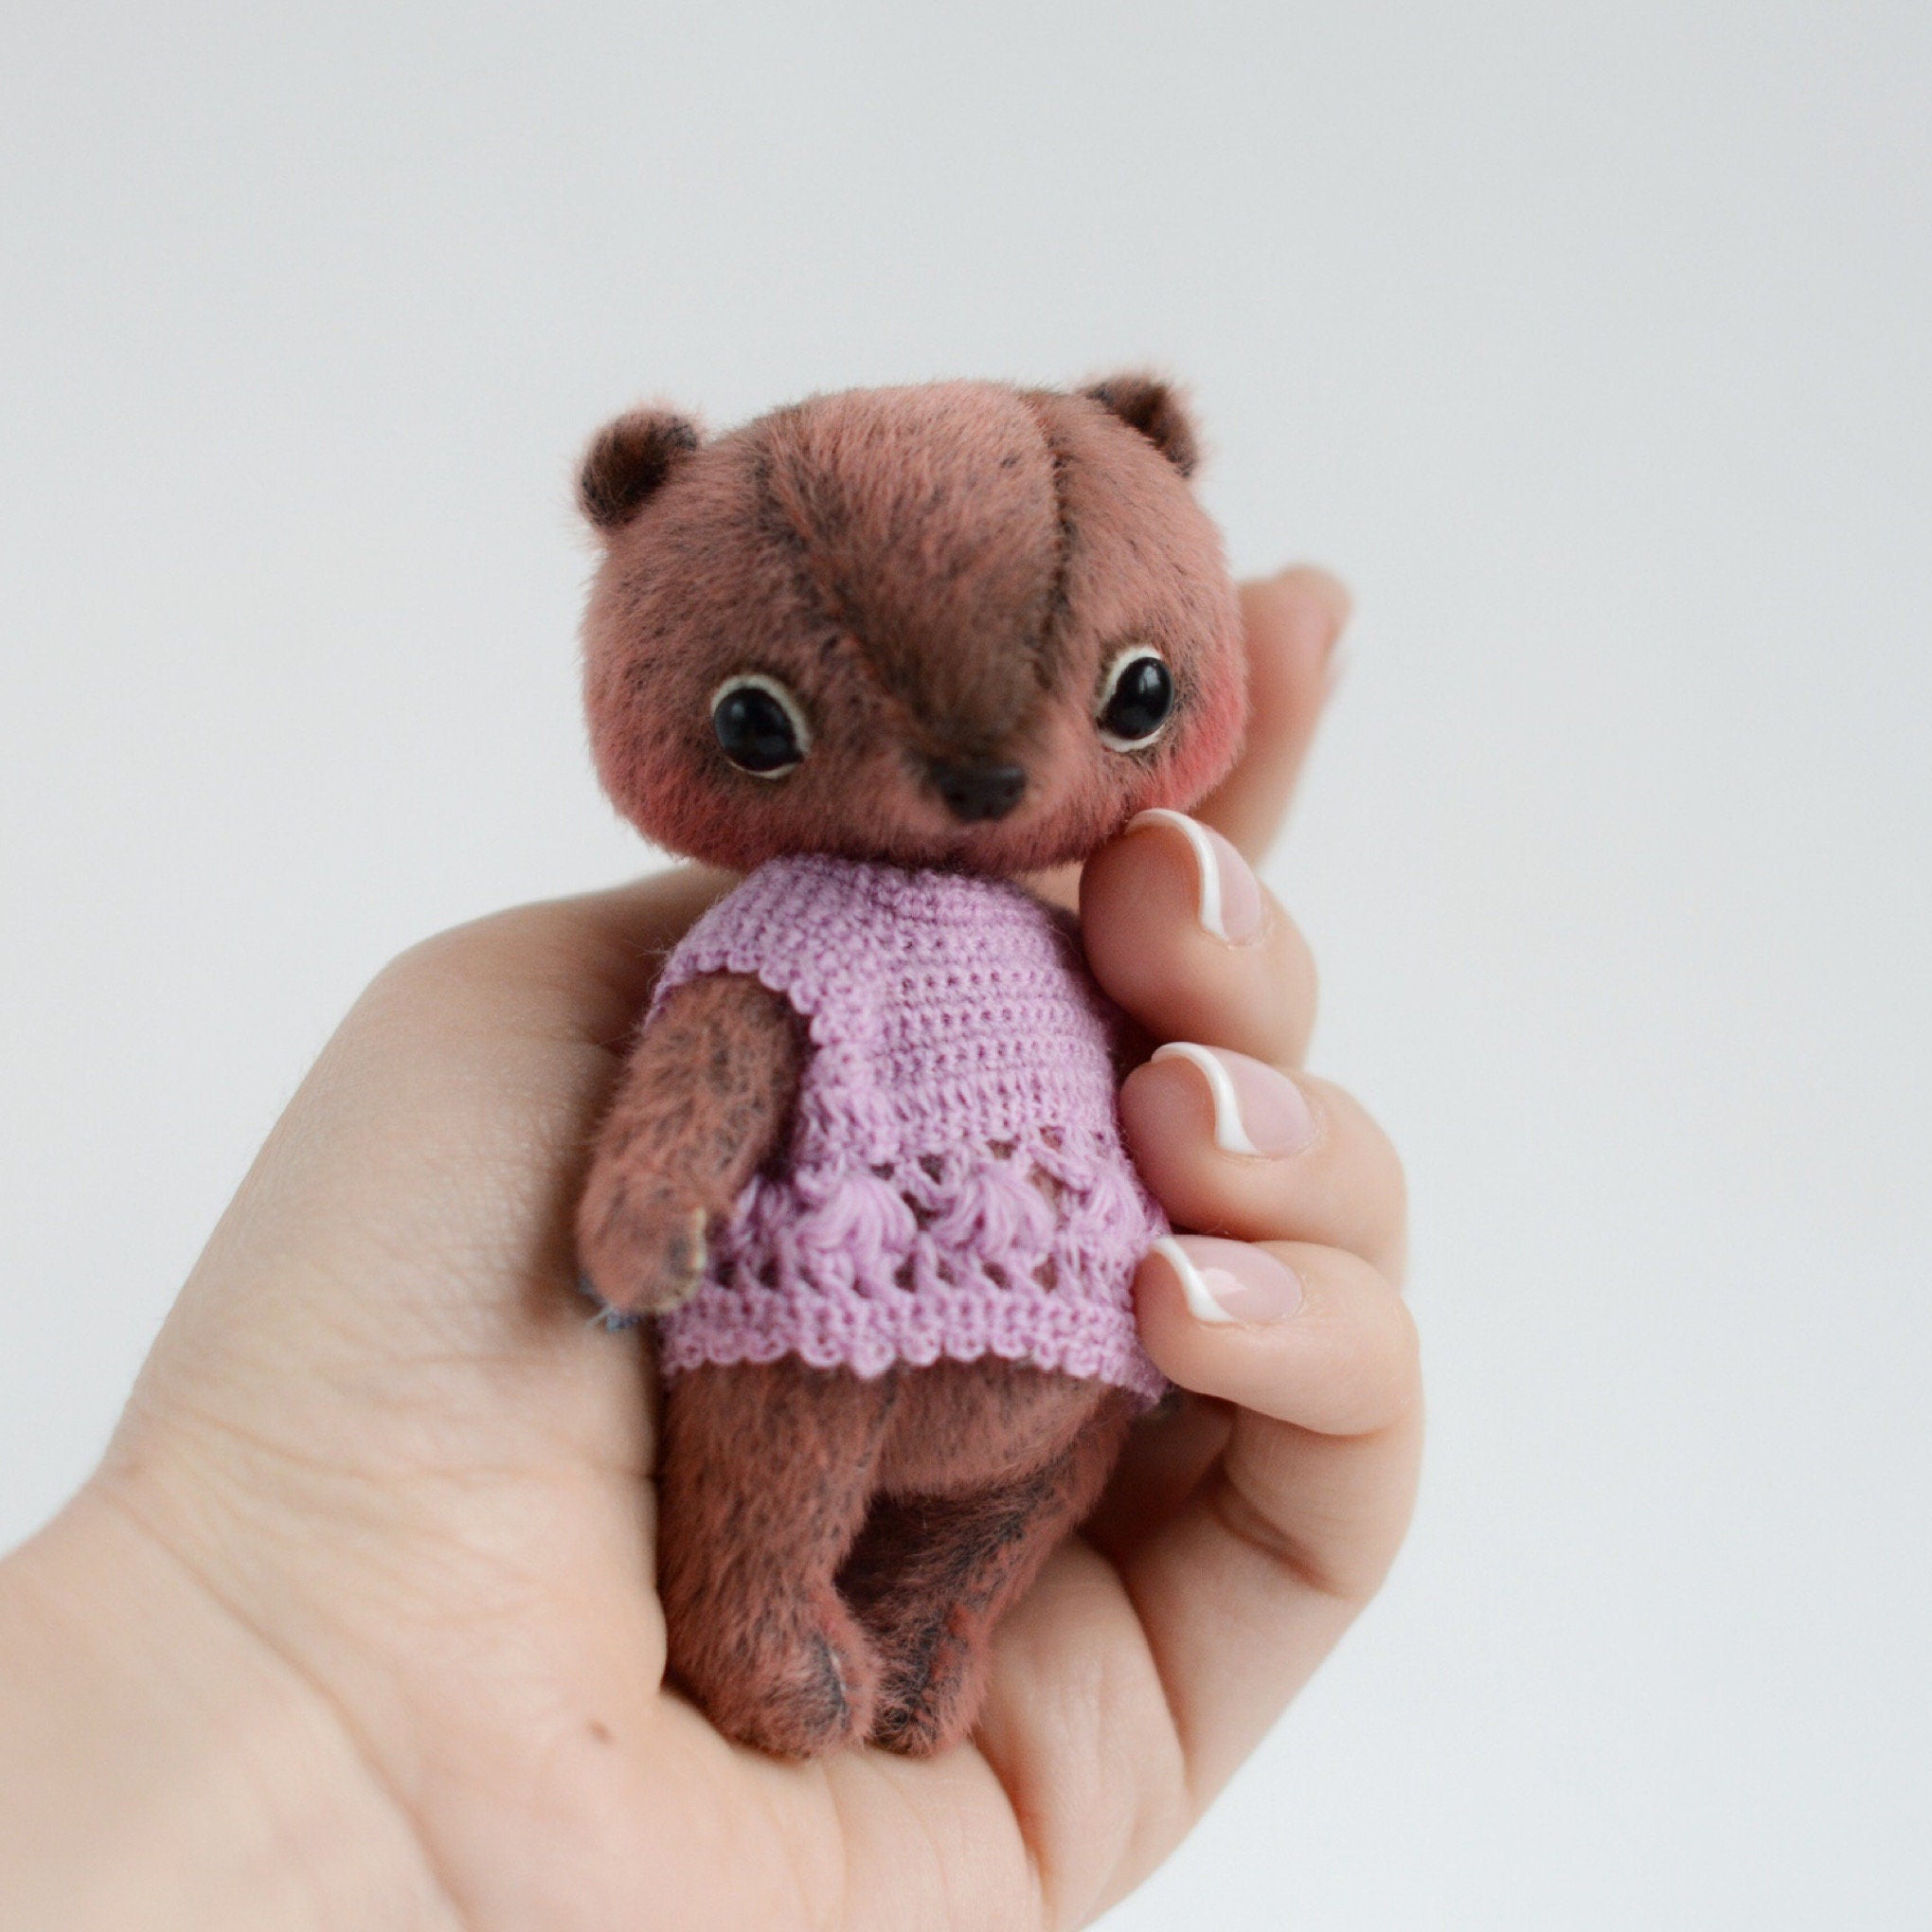 Miniature Teddy Bear PATTERN PDF text instructions, easy teddy bear pattern for beginners, how to sew traditional bear